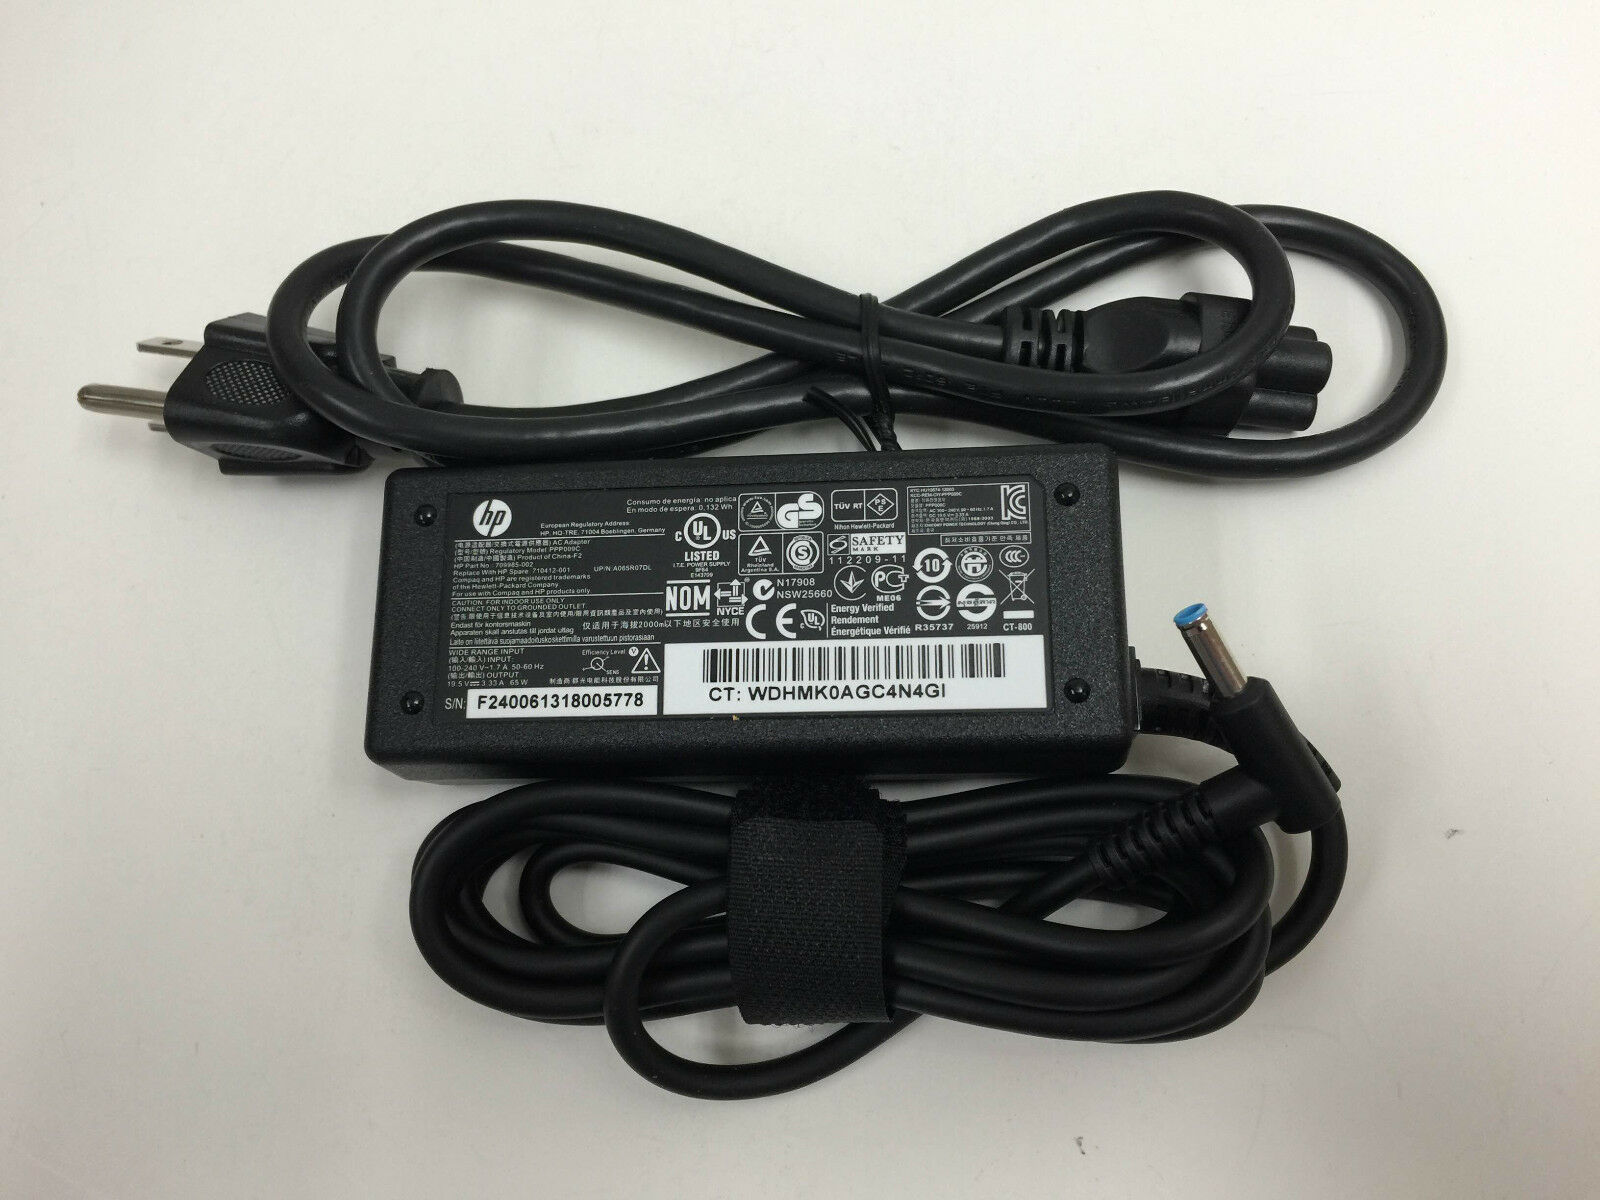 New 714657-001 714159-001 19.5V 3.33A AC Adapter for HP ProBook 645 G3, 640 G3, 655 G3, 650 G3 Laptop Charger